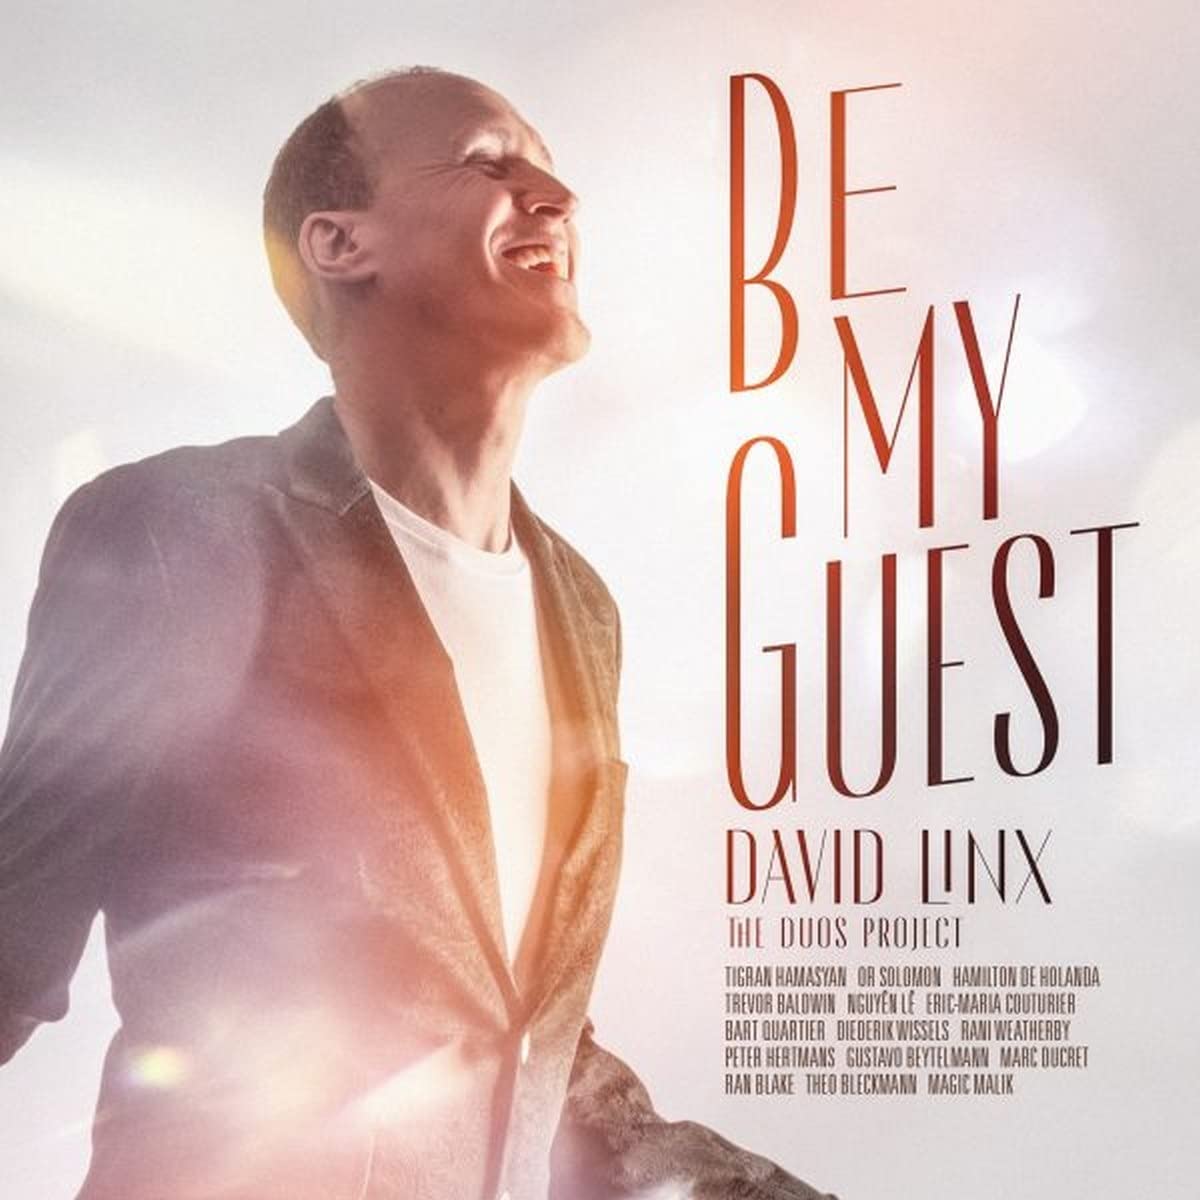 David Linx Be my guest  the duos project